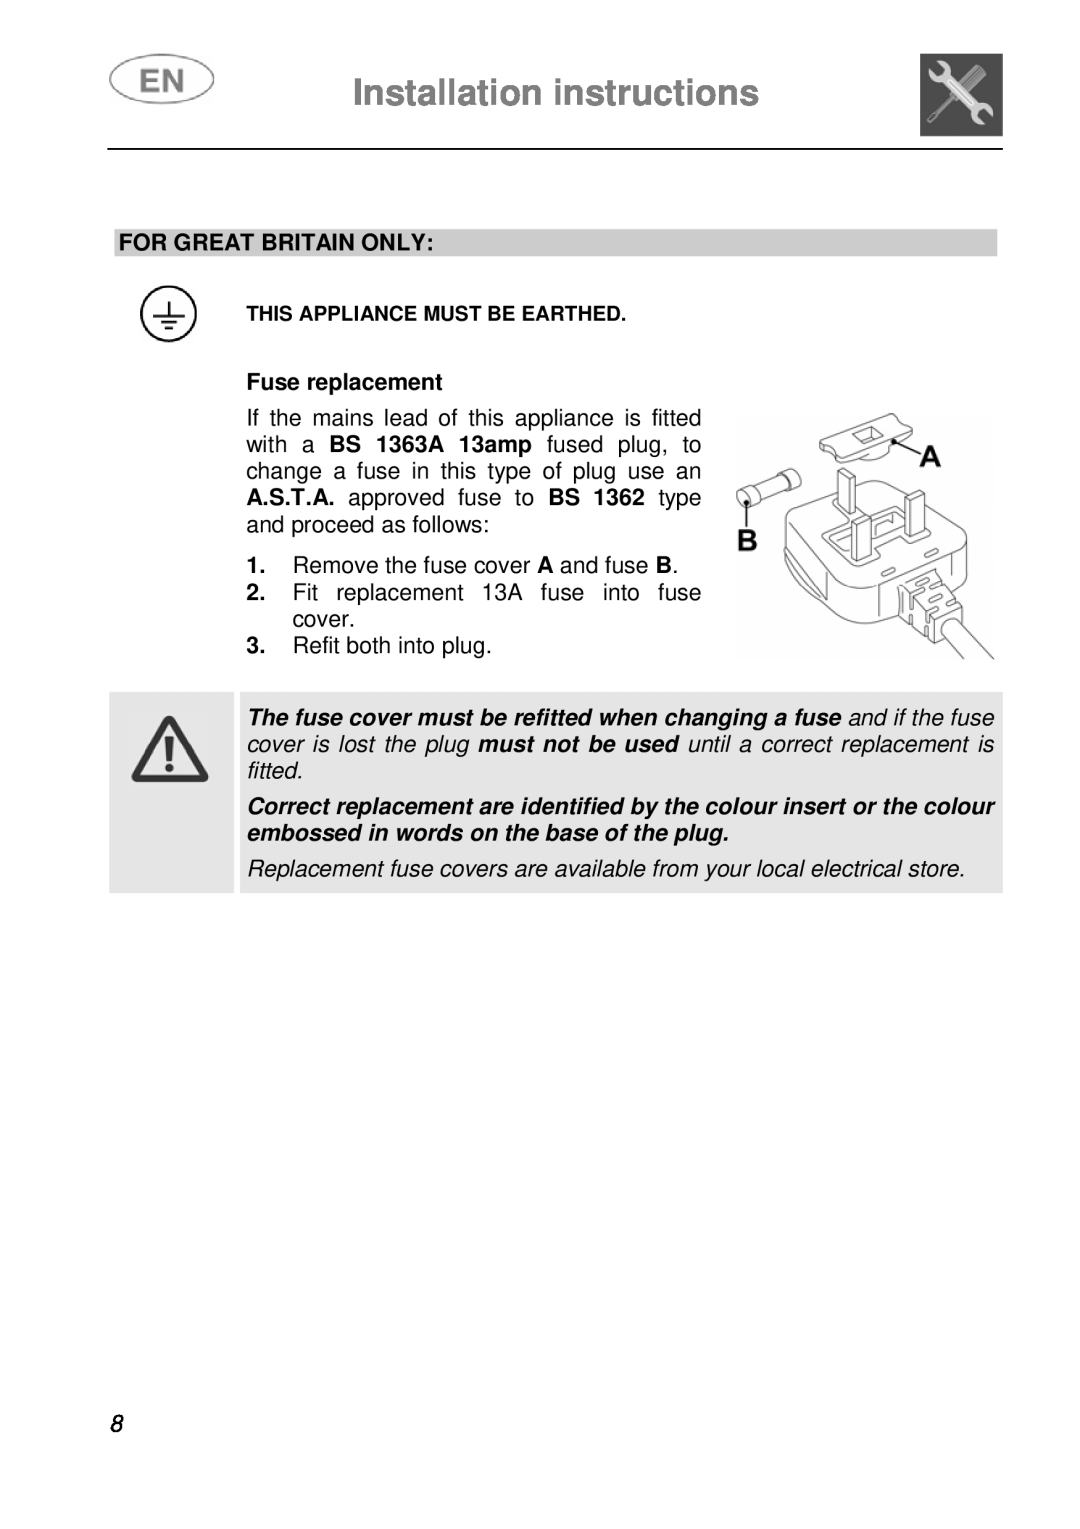 Smeg KLS55B instruction manual For Great Britain Only, Fuse replacement, Installation instructions 